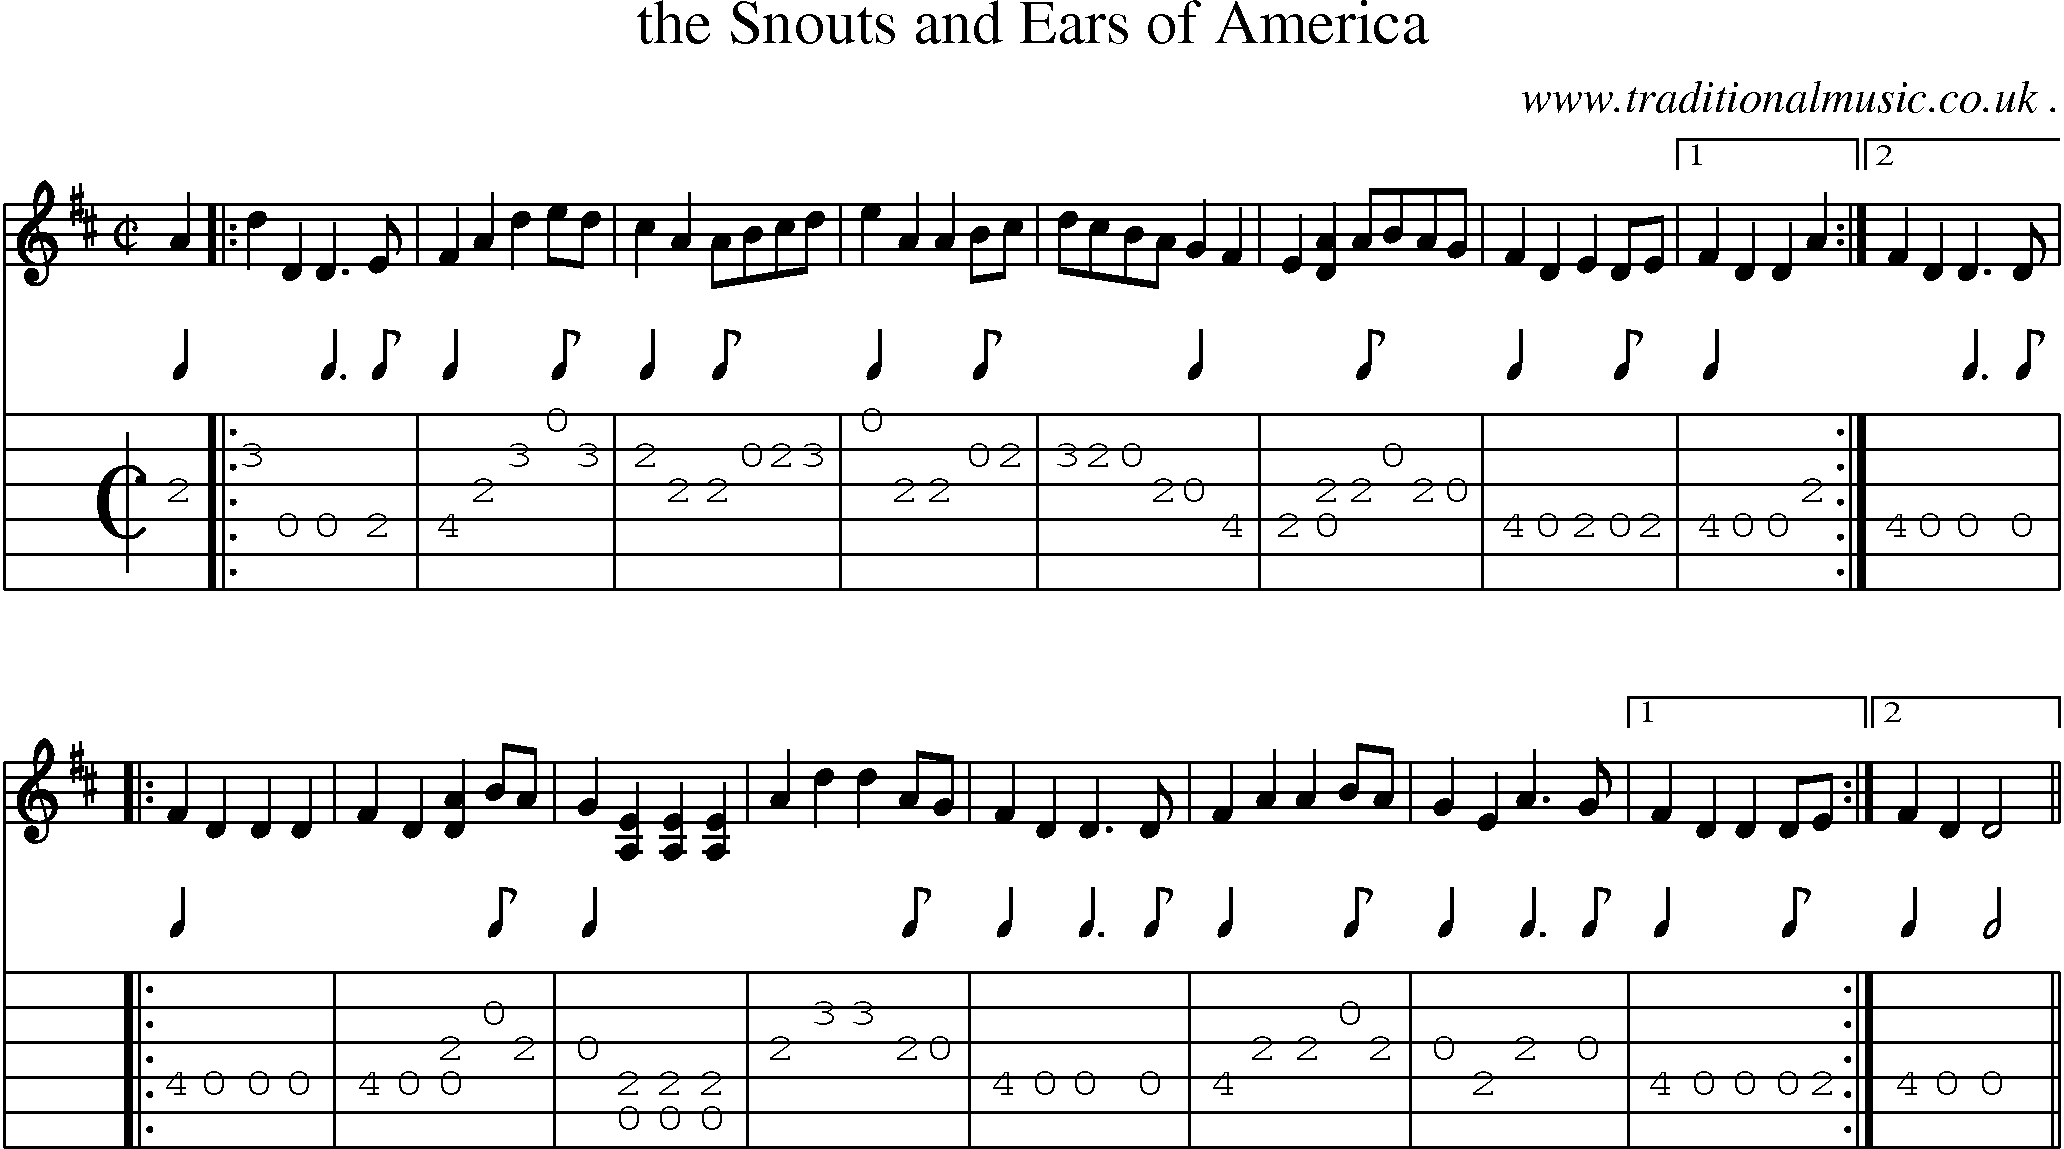 Music Score and Guitar Tabs for The Snouts And Ears Of America